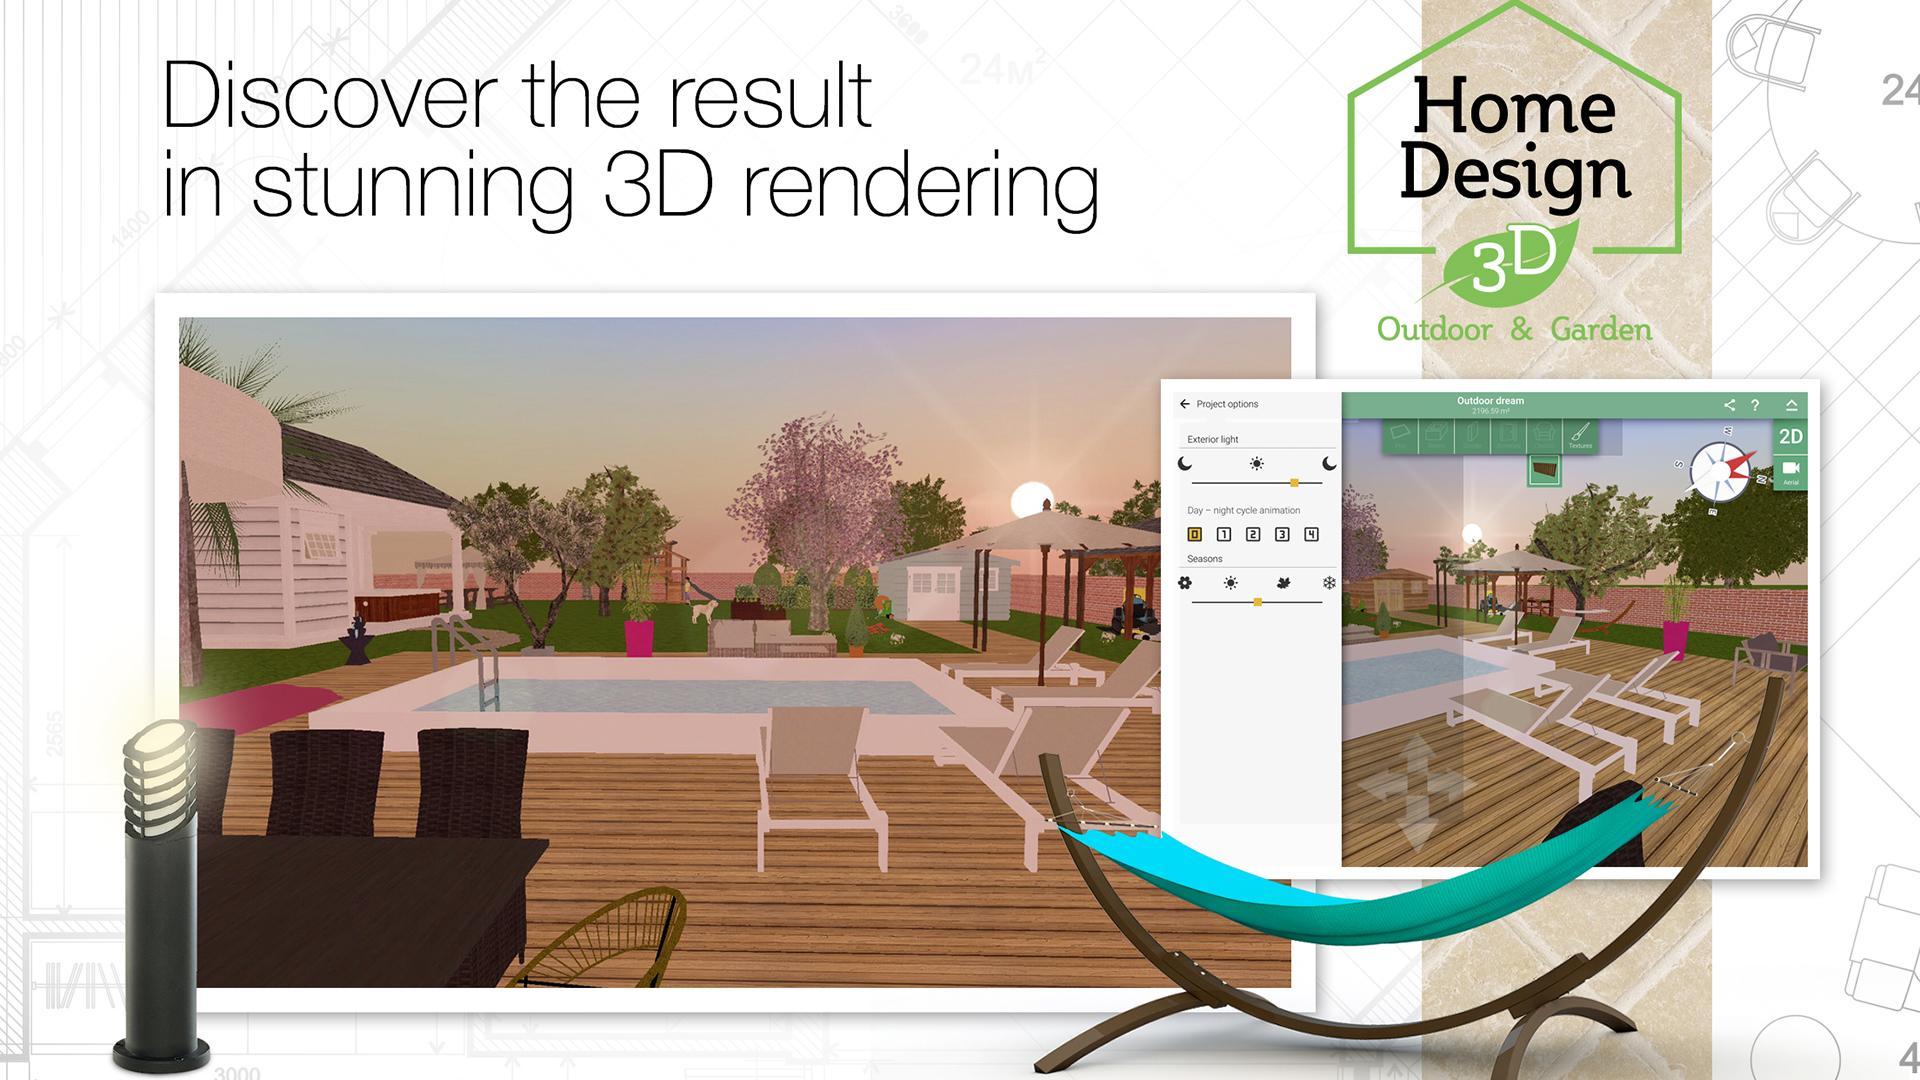 Home Design 3d Outdoor Garden For Android Apk Download